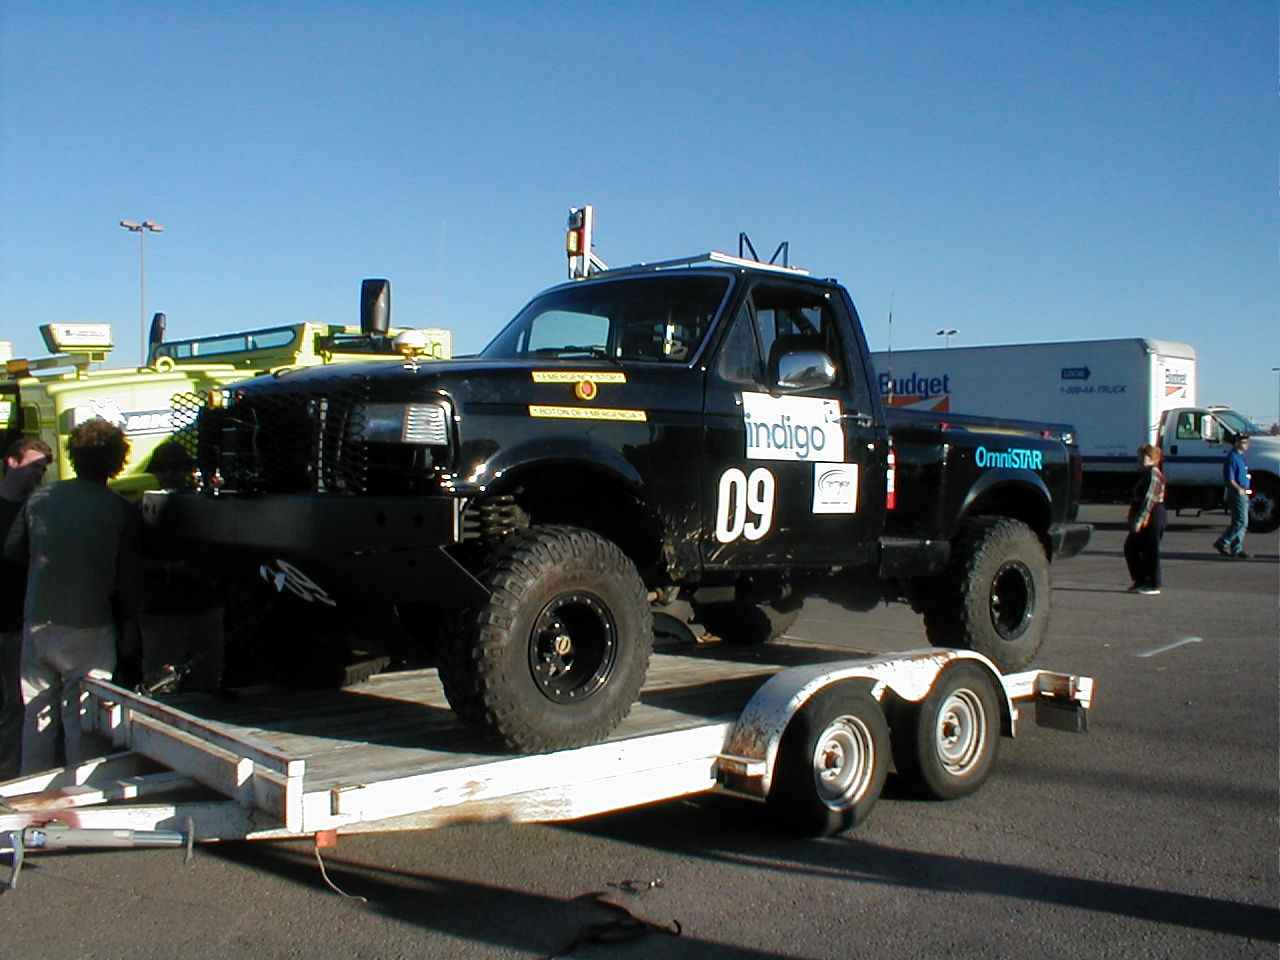 Golem Team's dark house vehicle, a Ford F-150, which defied expectations by traveling over 5 miles
                  after a weak qualification